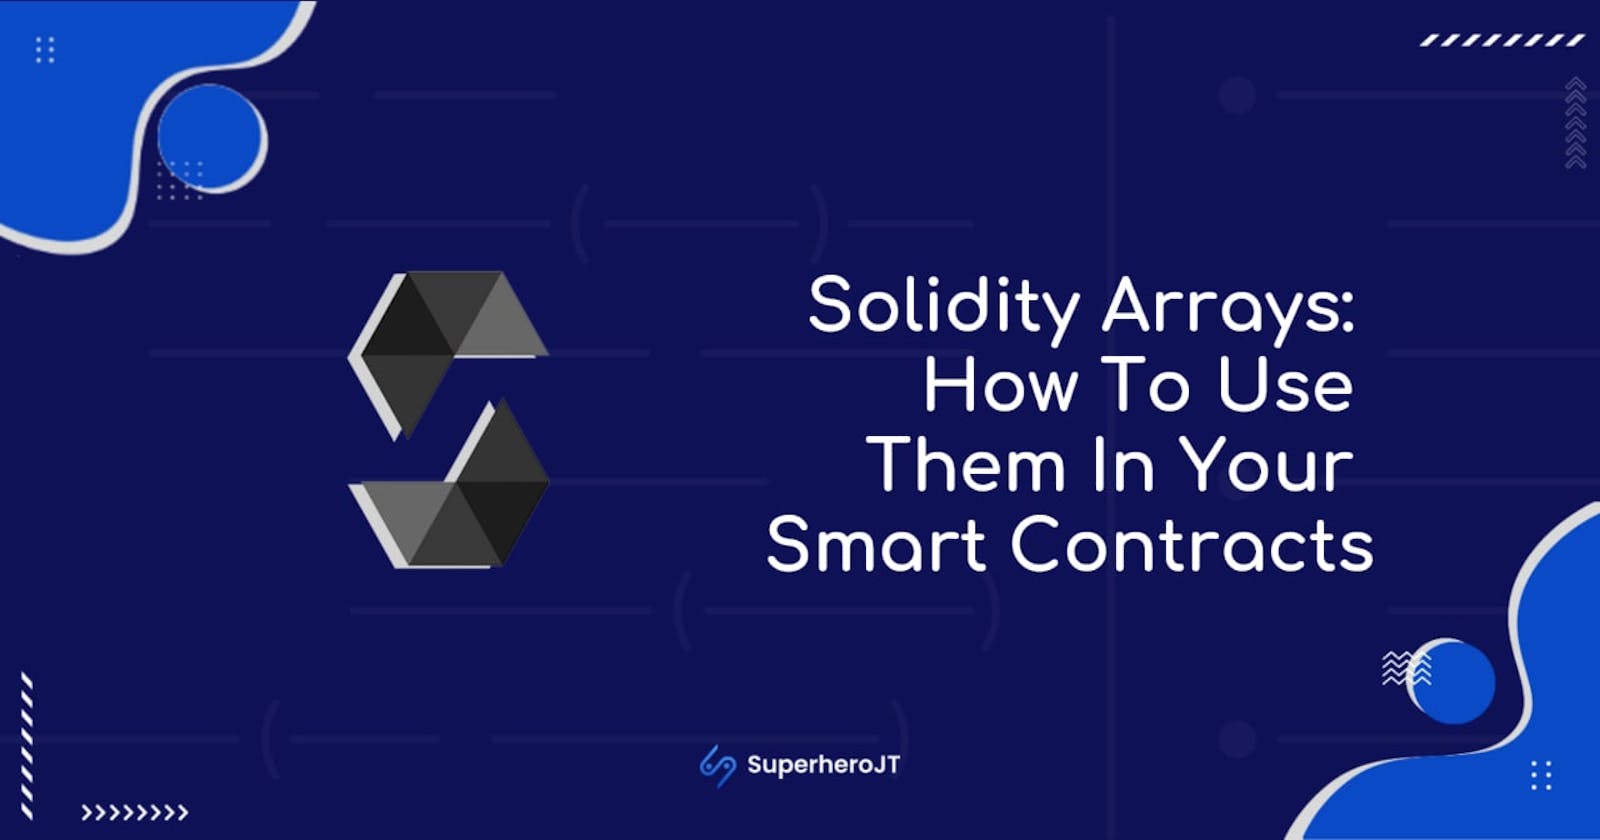 Solidity Arrays: How To Use Them In Your Smart Contracts.